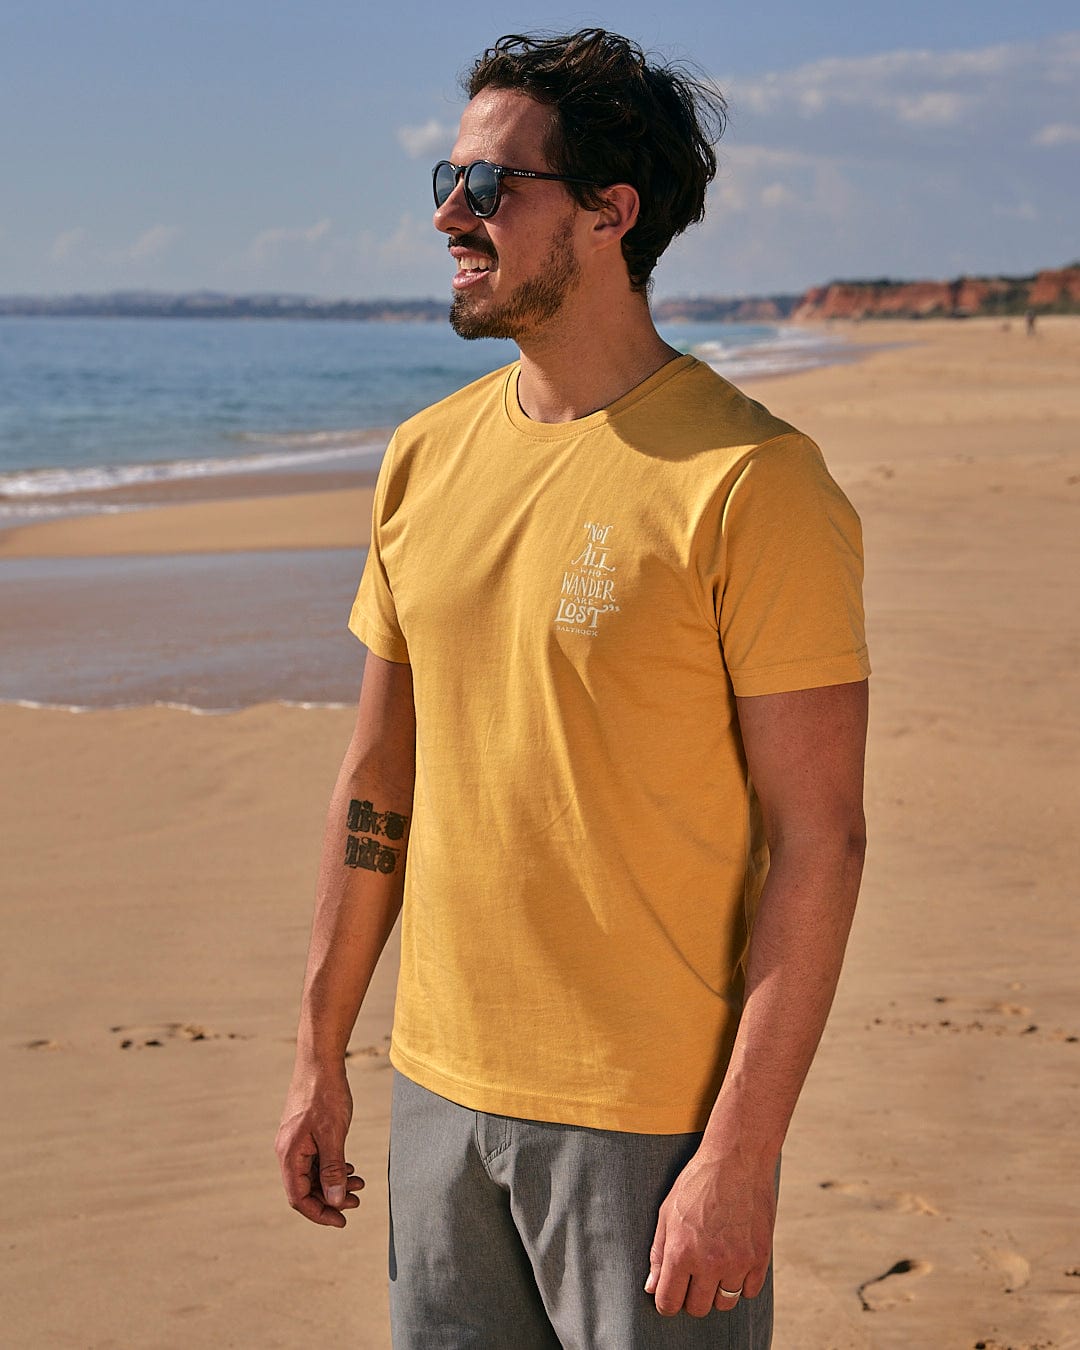 A man wearing a Lost Ships - Mens Short Sleeve T-Shirt - Yellow by Saltrock standing on the beach.